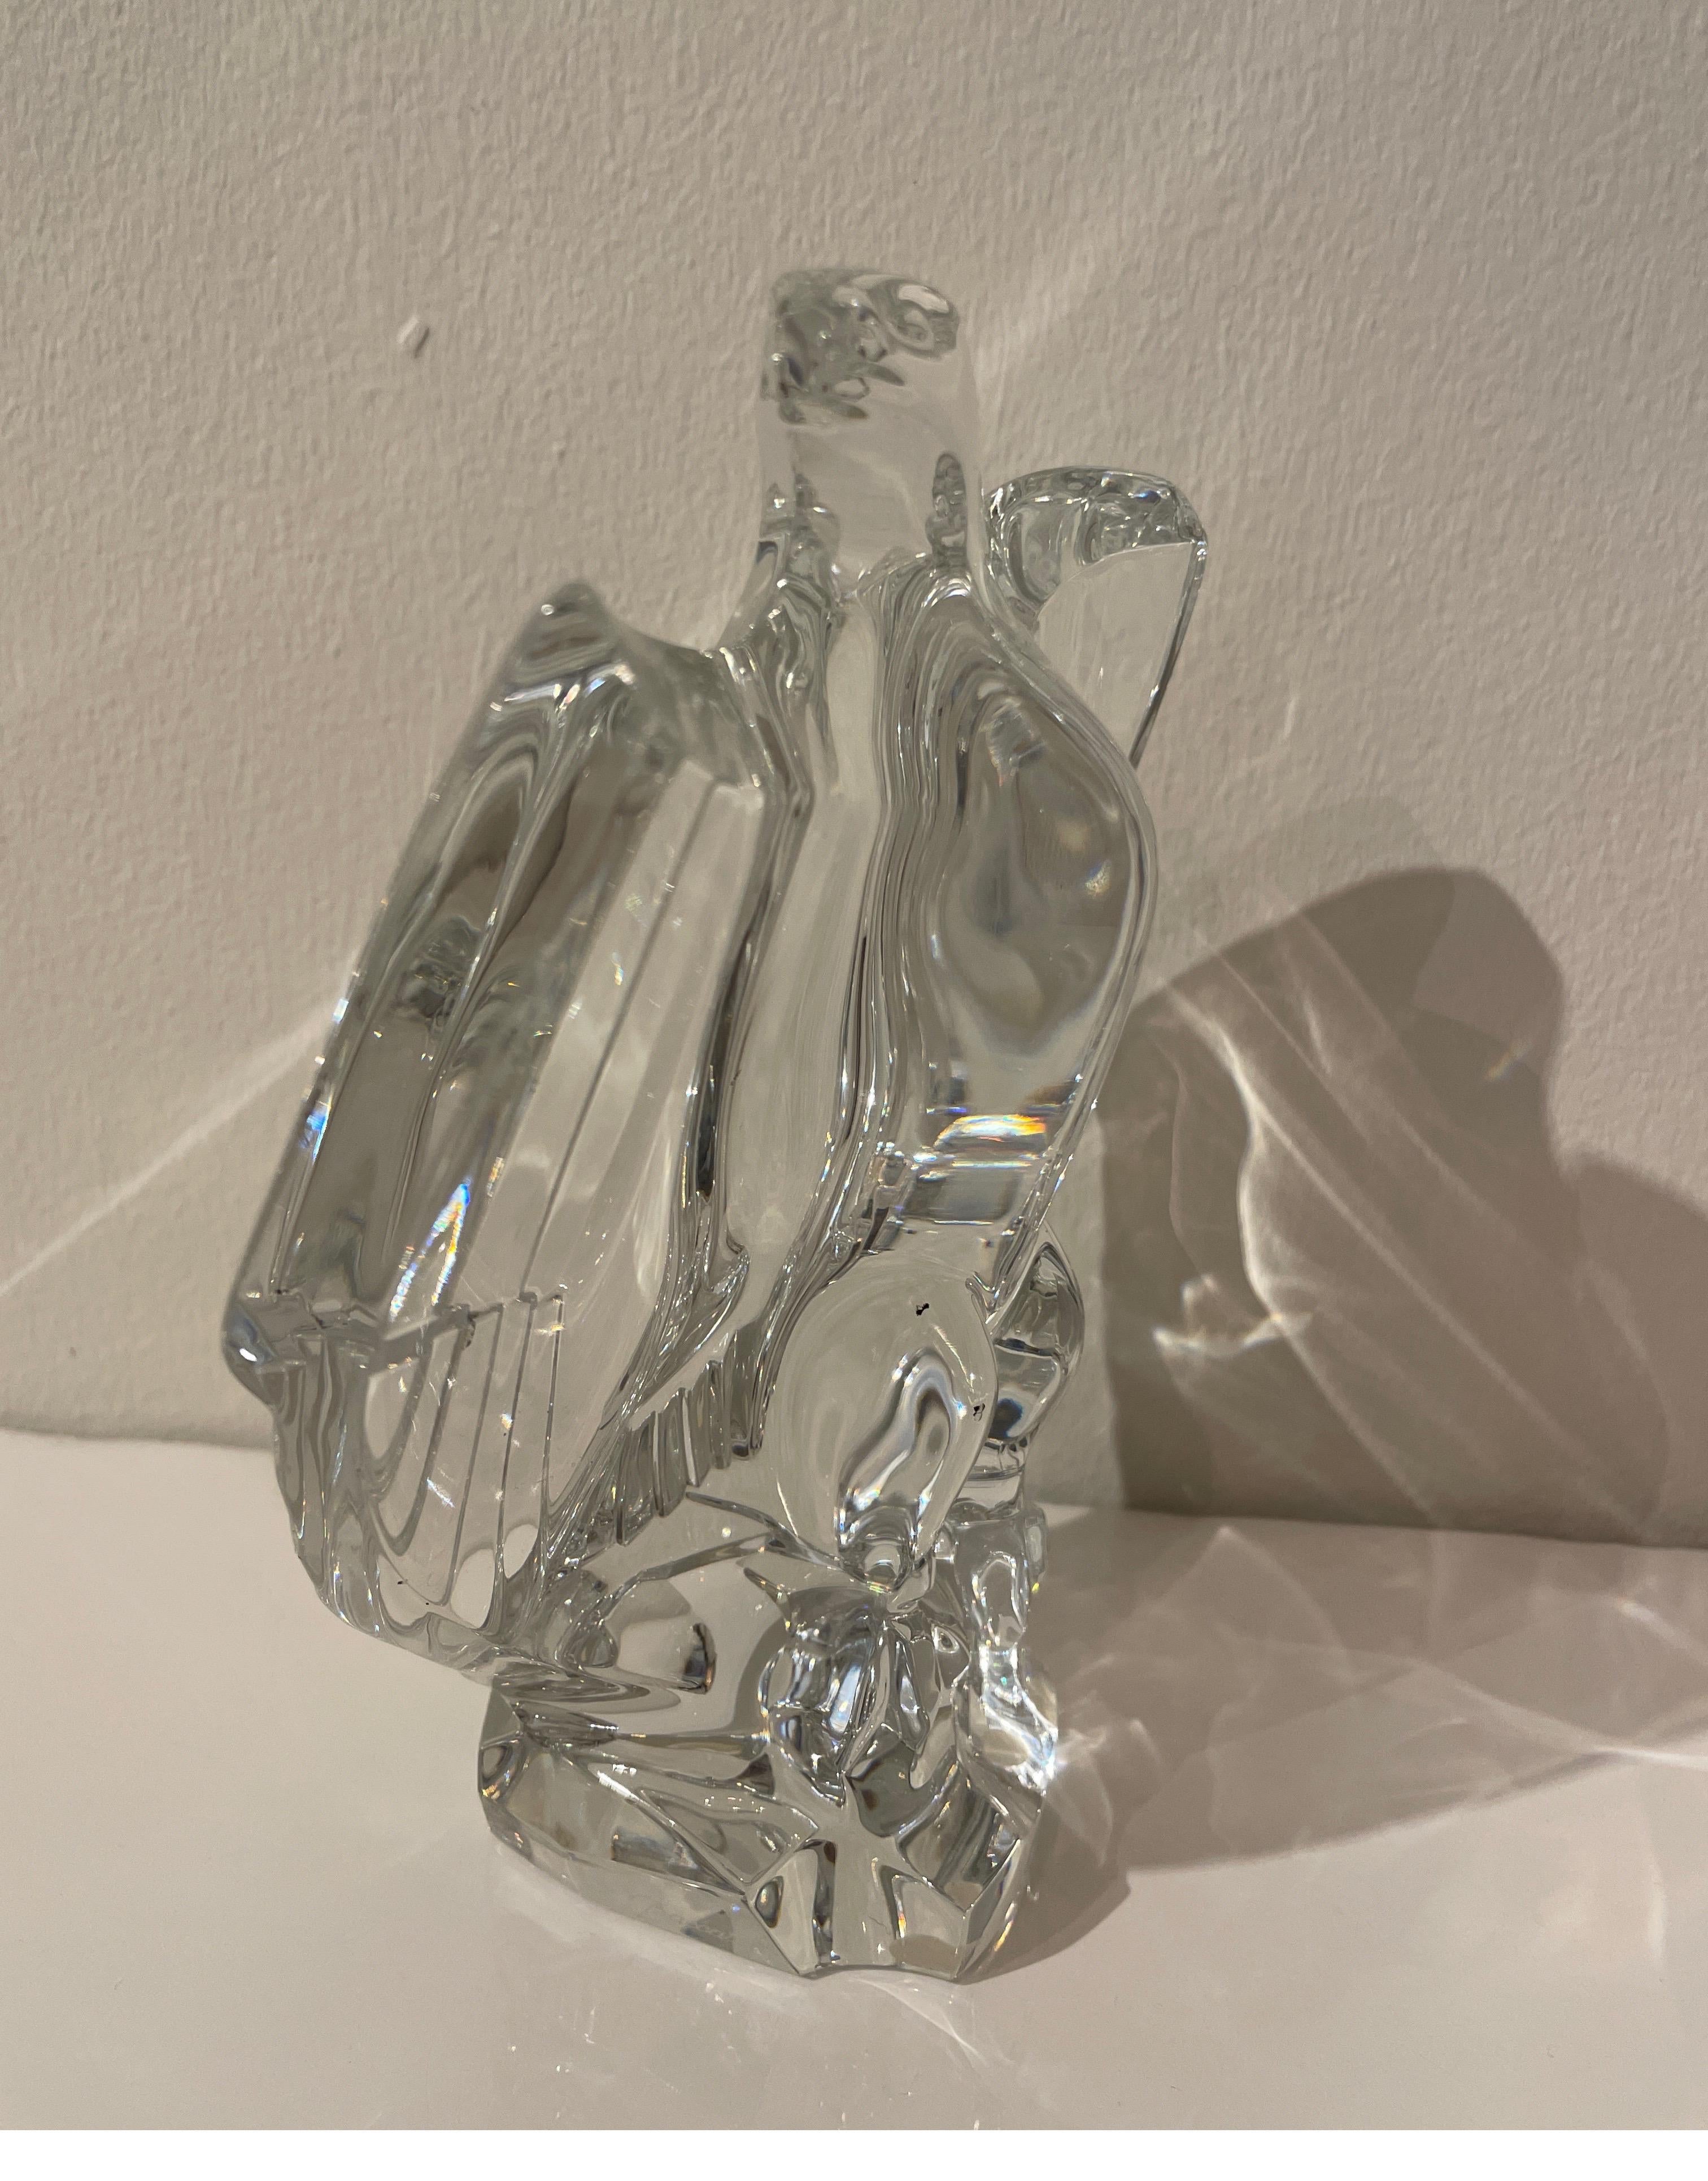 Vintage glass eagle figurine by Baccarat. This piece will look great on your desk & will make a perfect paperweight.